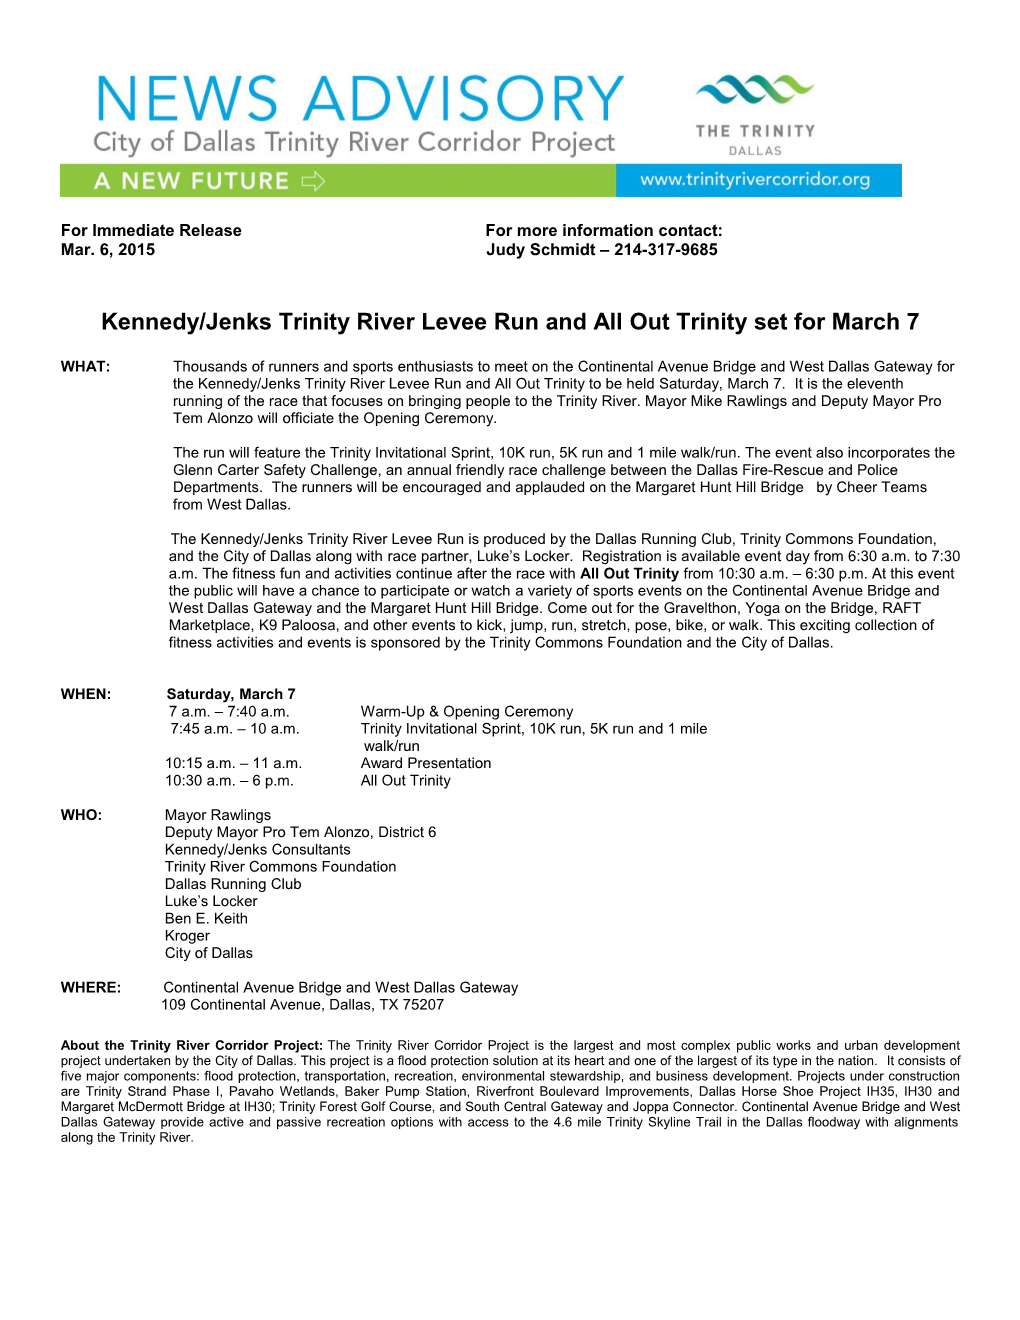 Kennedy/Jenkstrinity River Levee Run and All out Trinityset for March 7